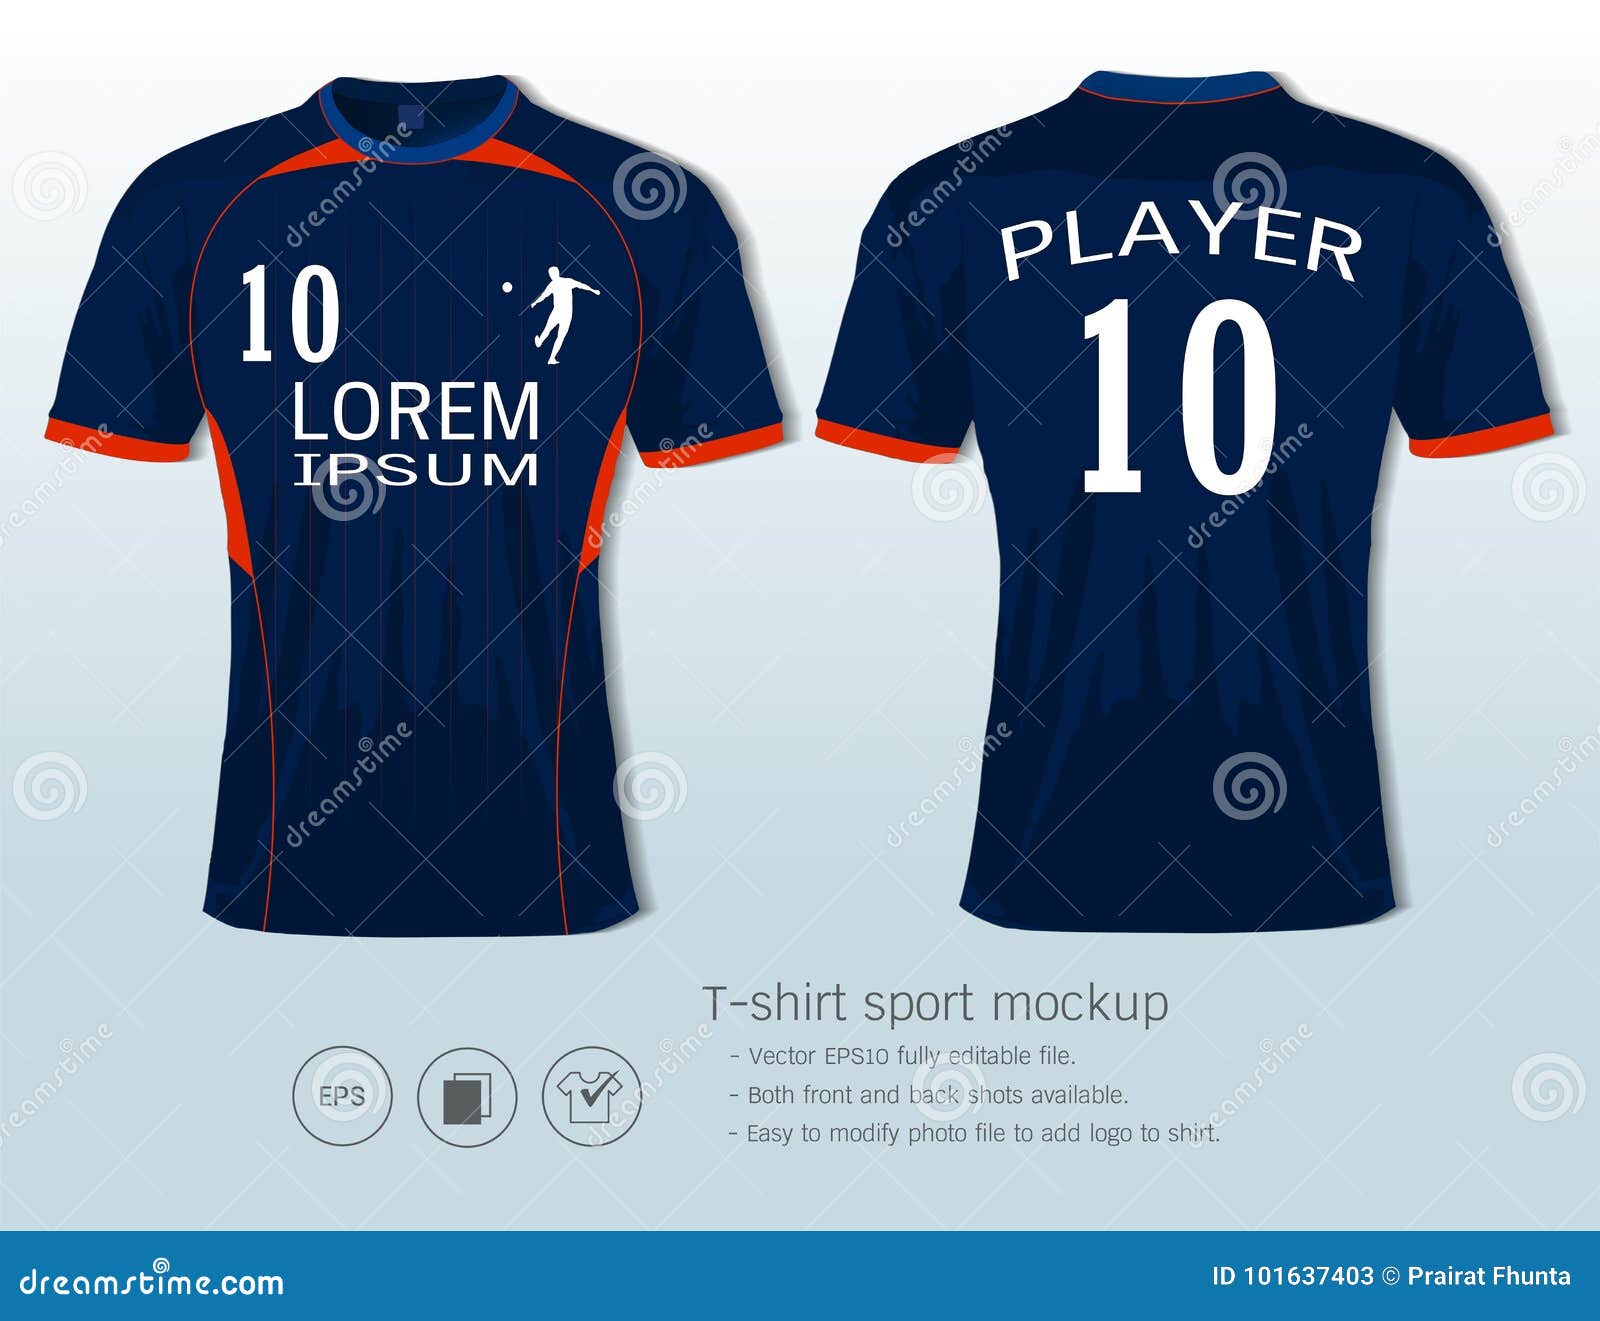 Soccer Jersey Template for Football Club or Sportswear Uniforms Stock ...